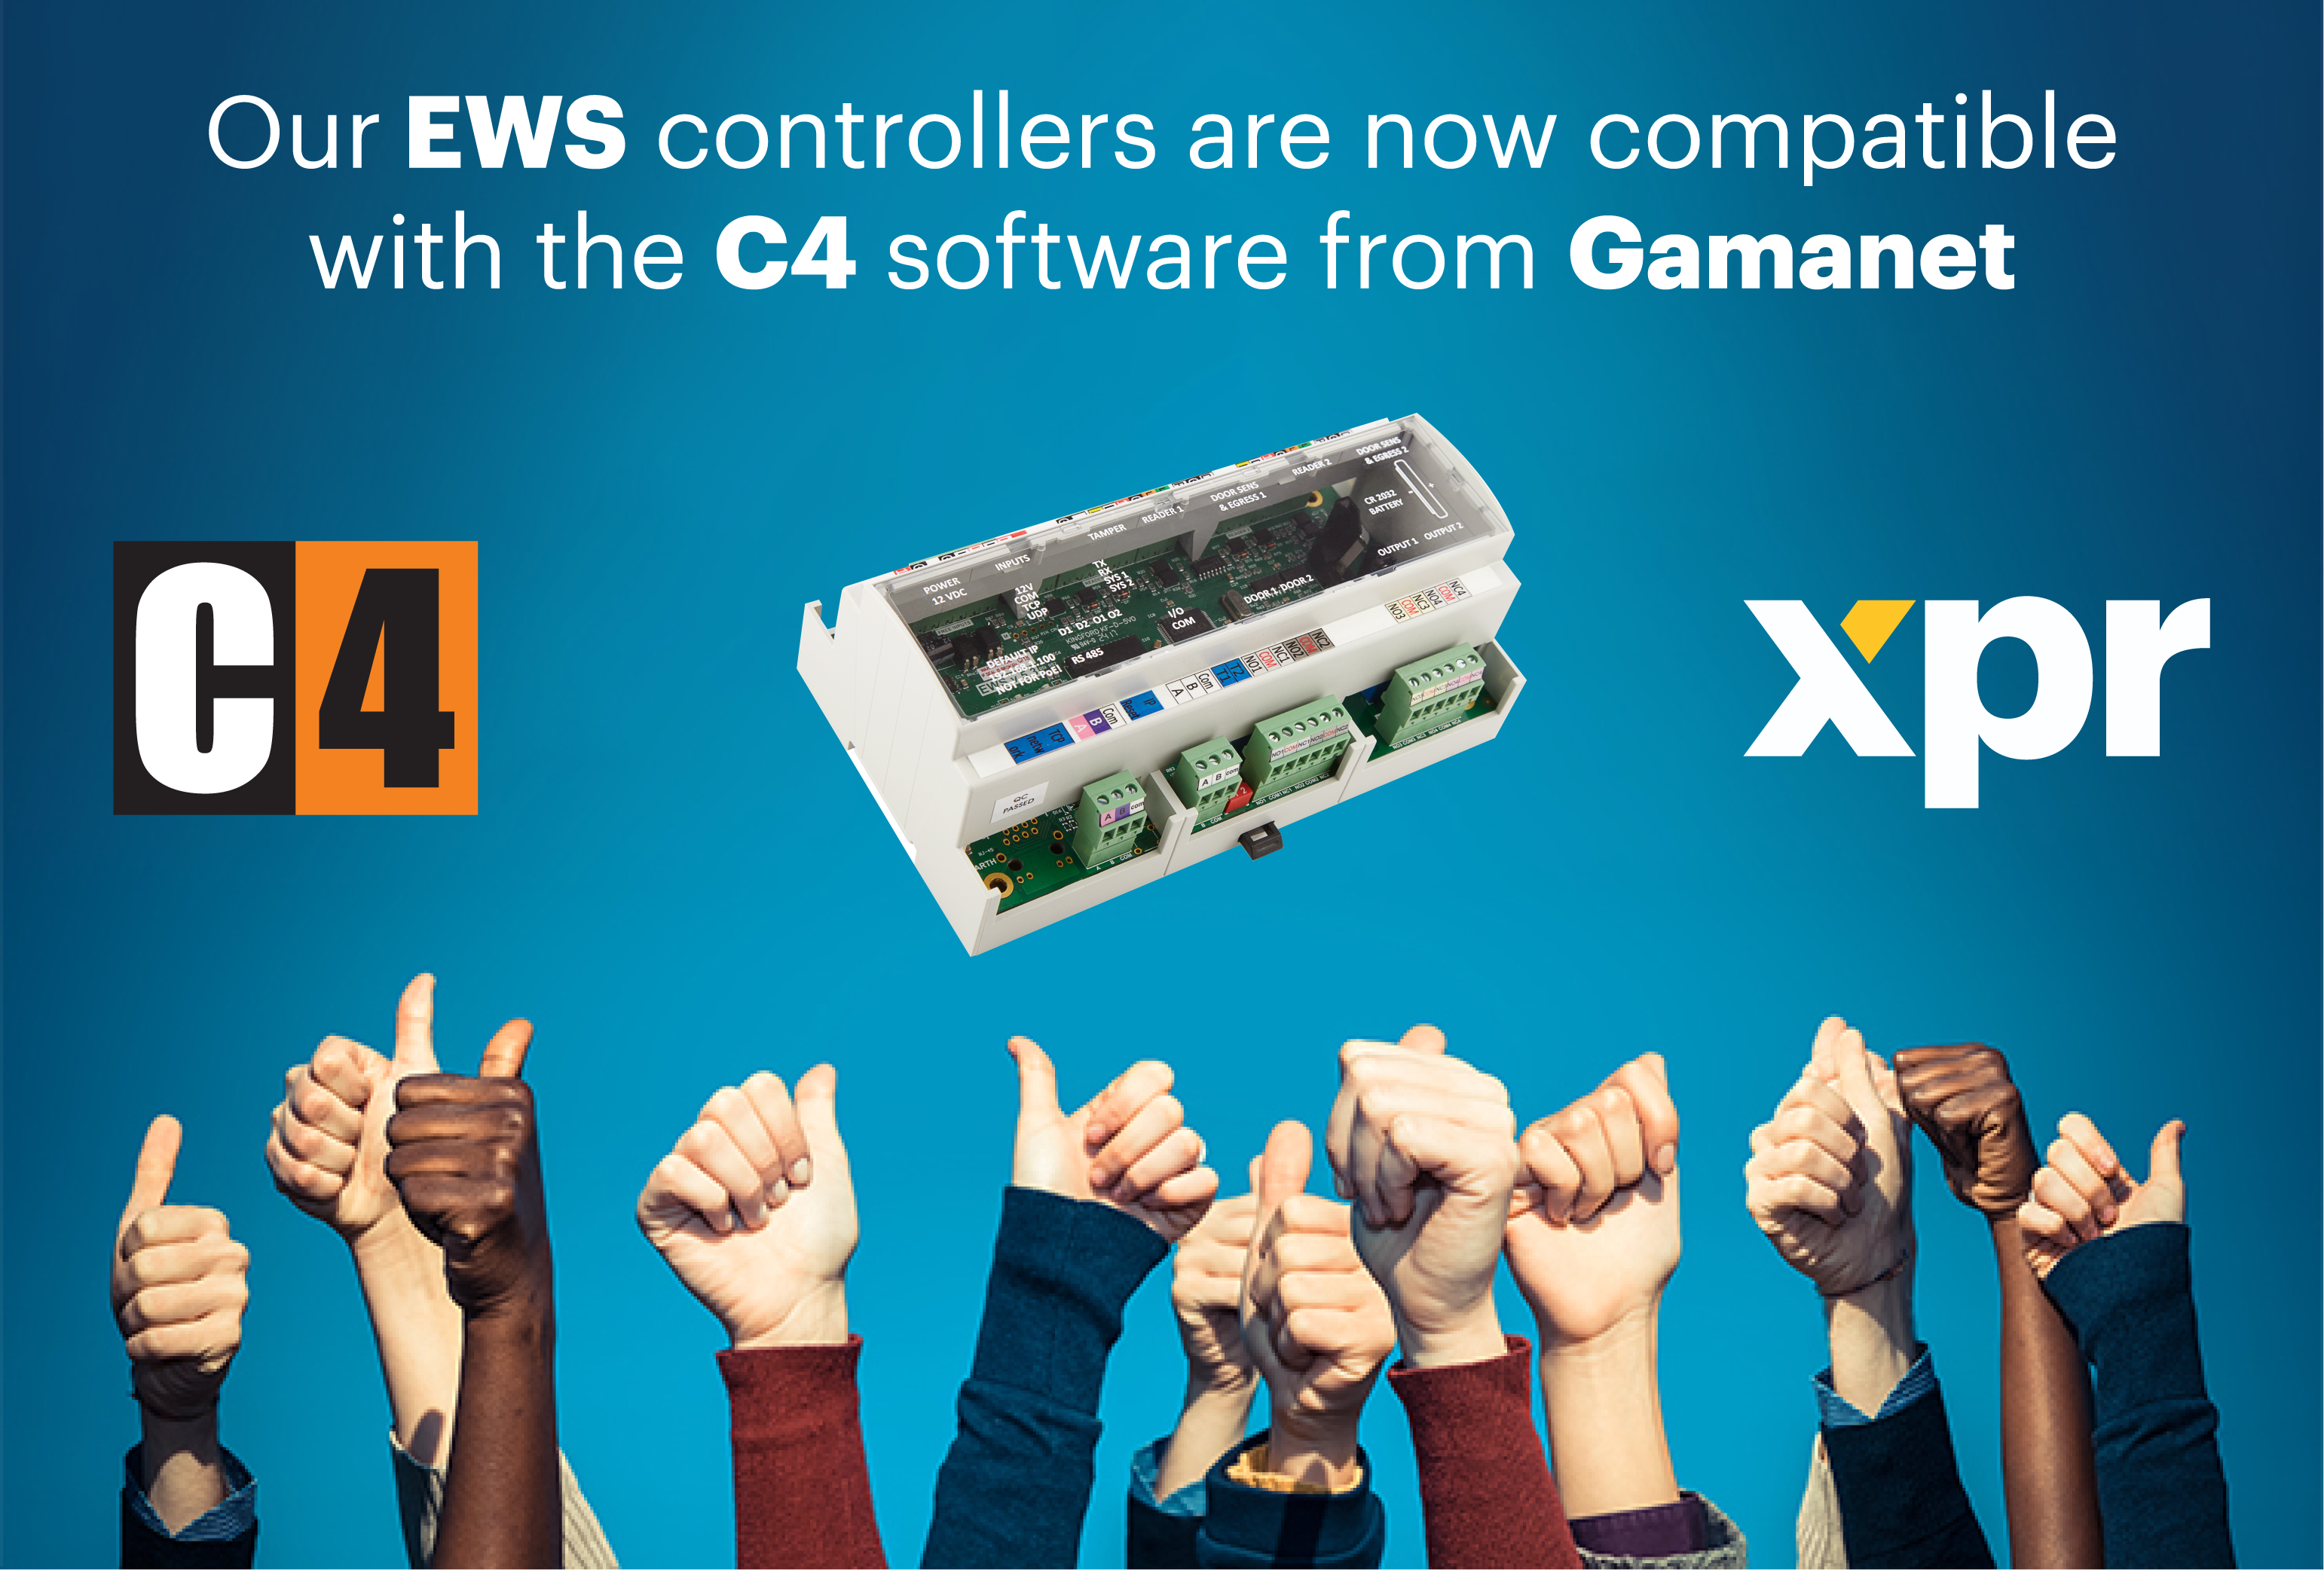 Our EWS controllers are now compatible with the C4 software from Gamanet